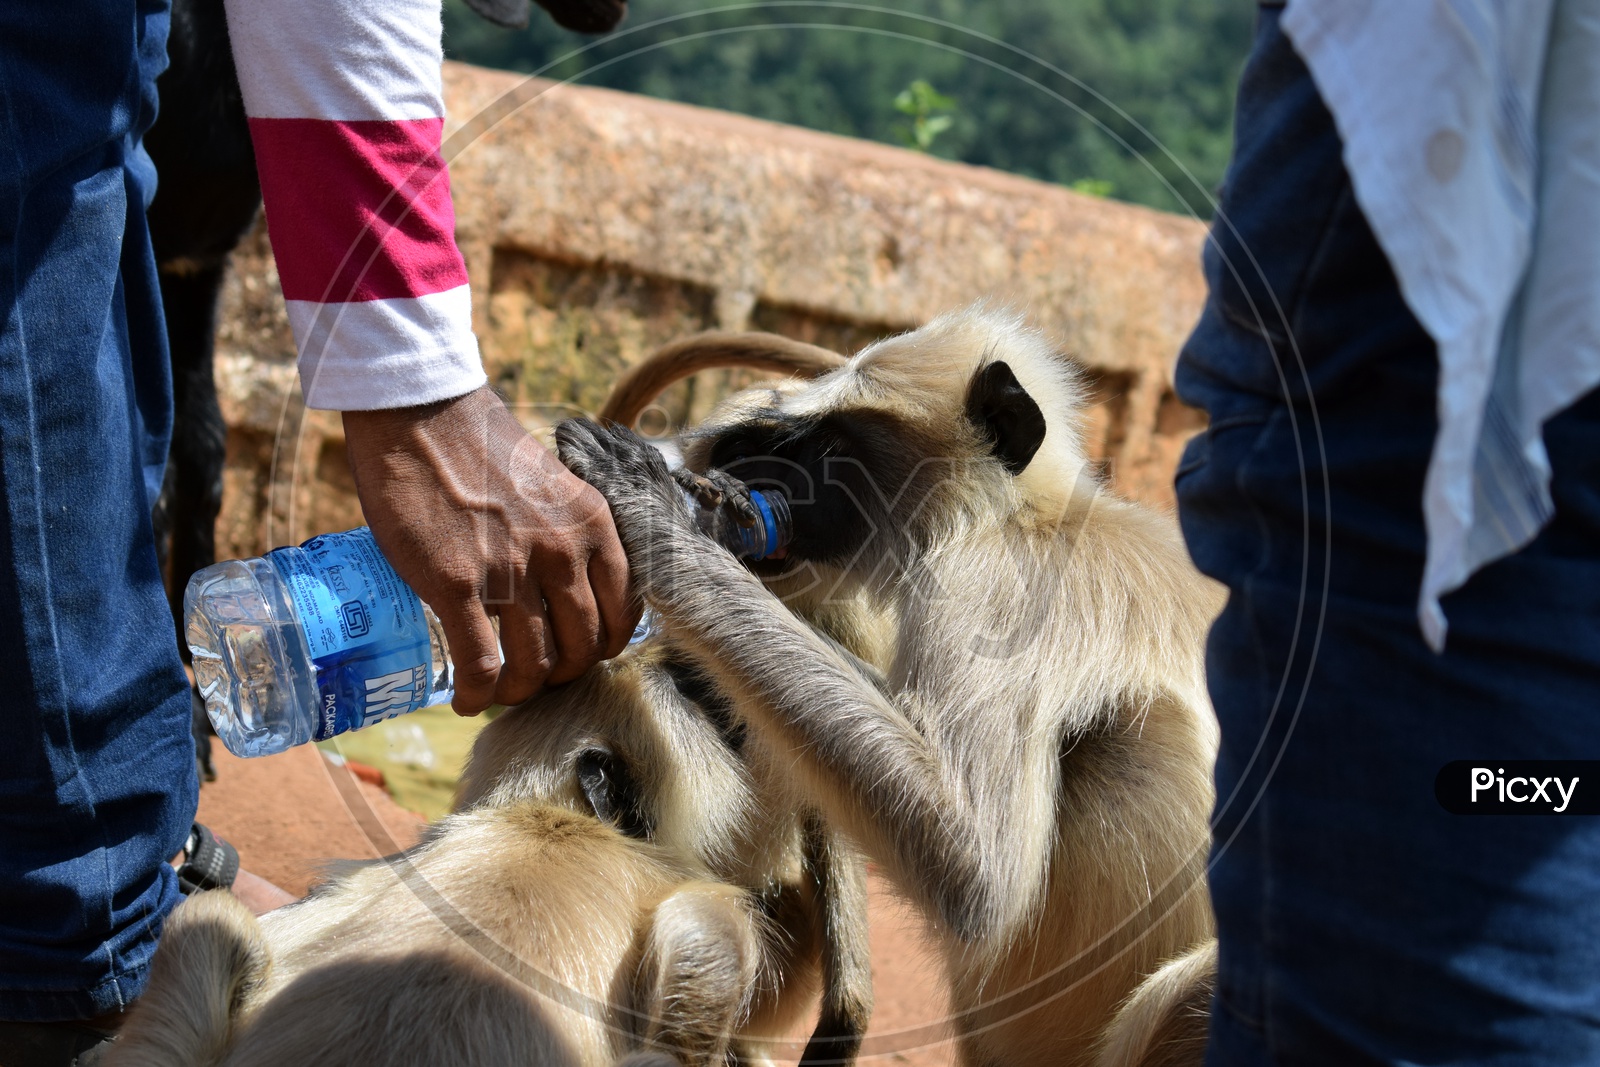 Thirsty Gray Langur having water offered by a man. Summer effect. 